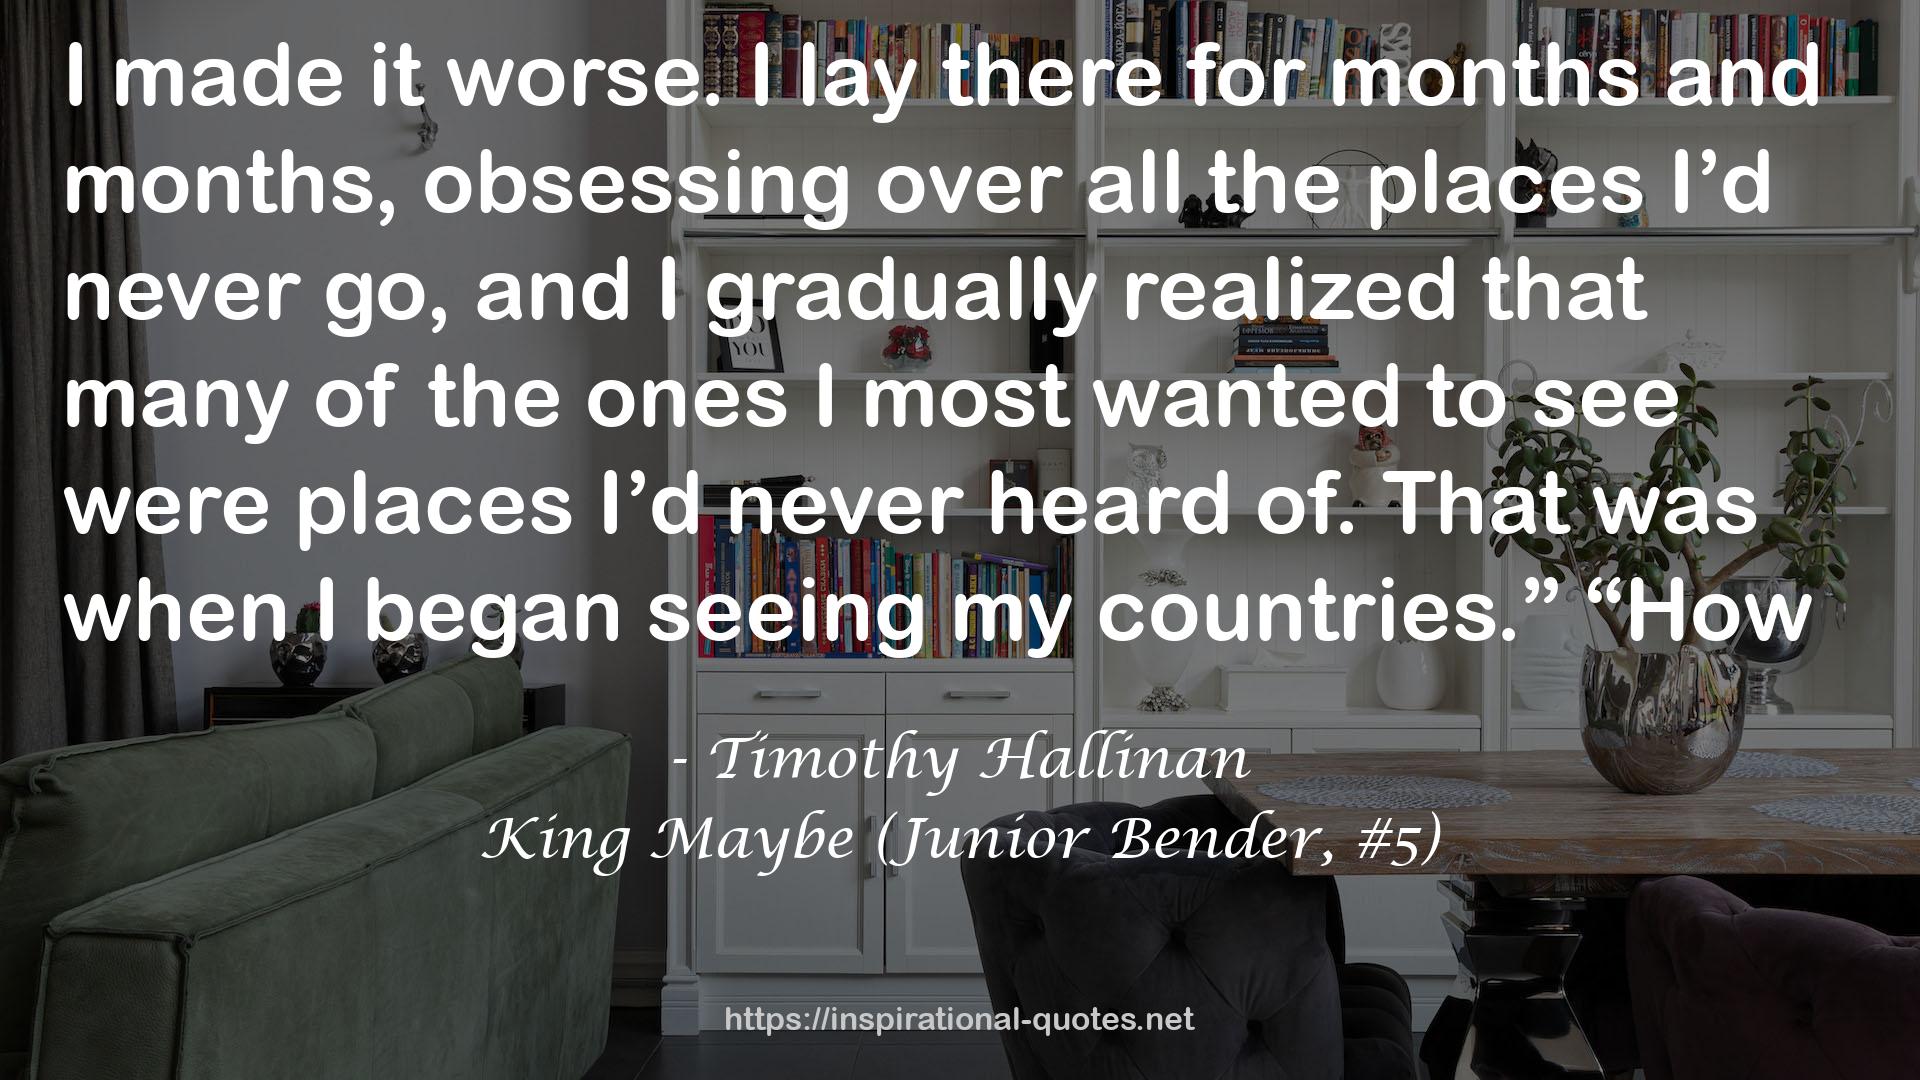 King Maybe (Junior Bender, #5) QUOTES